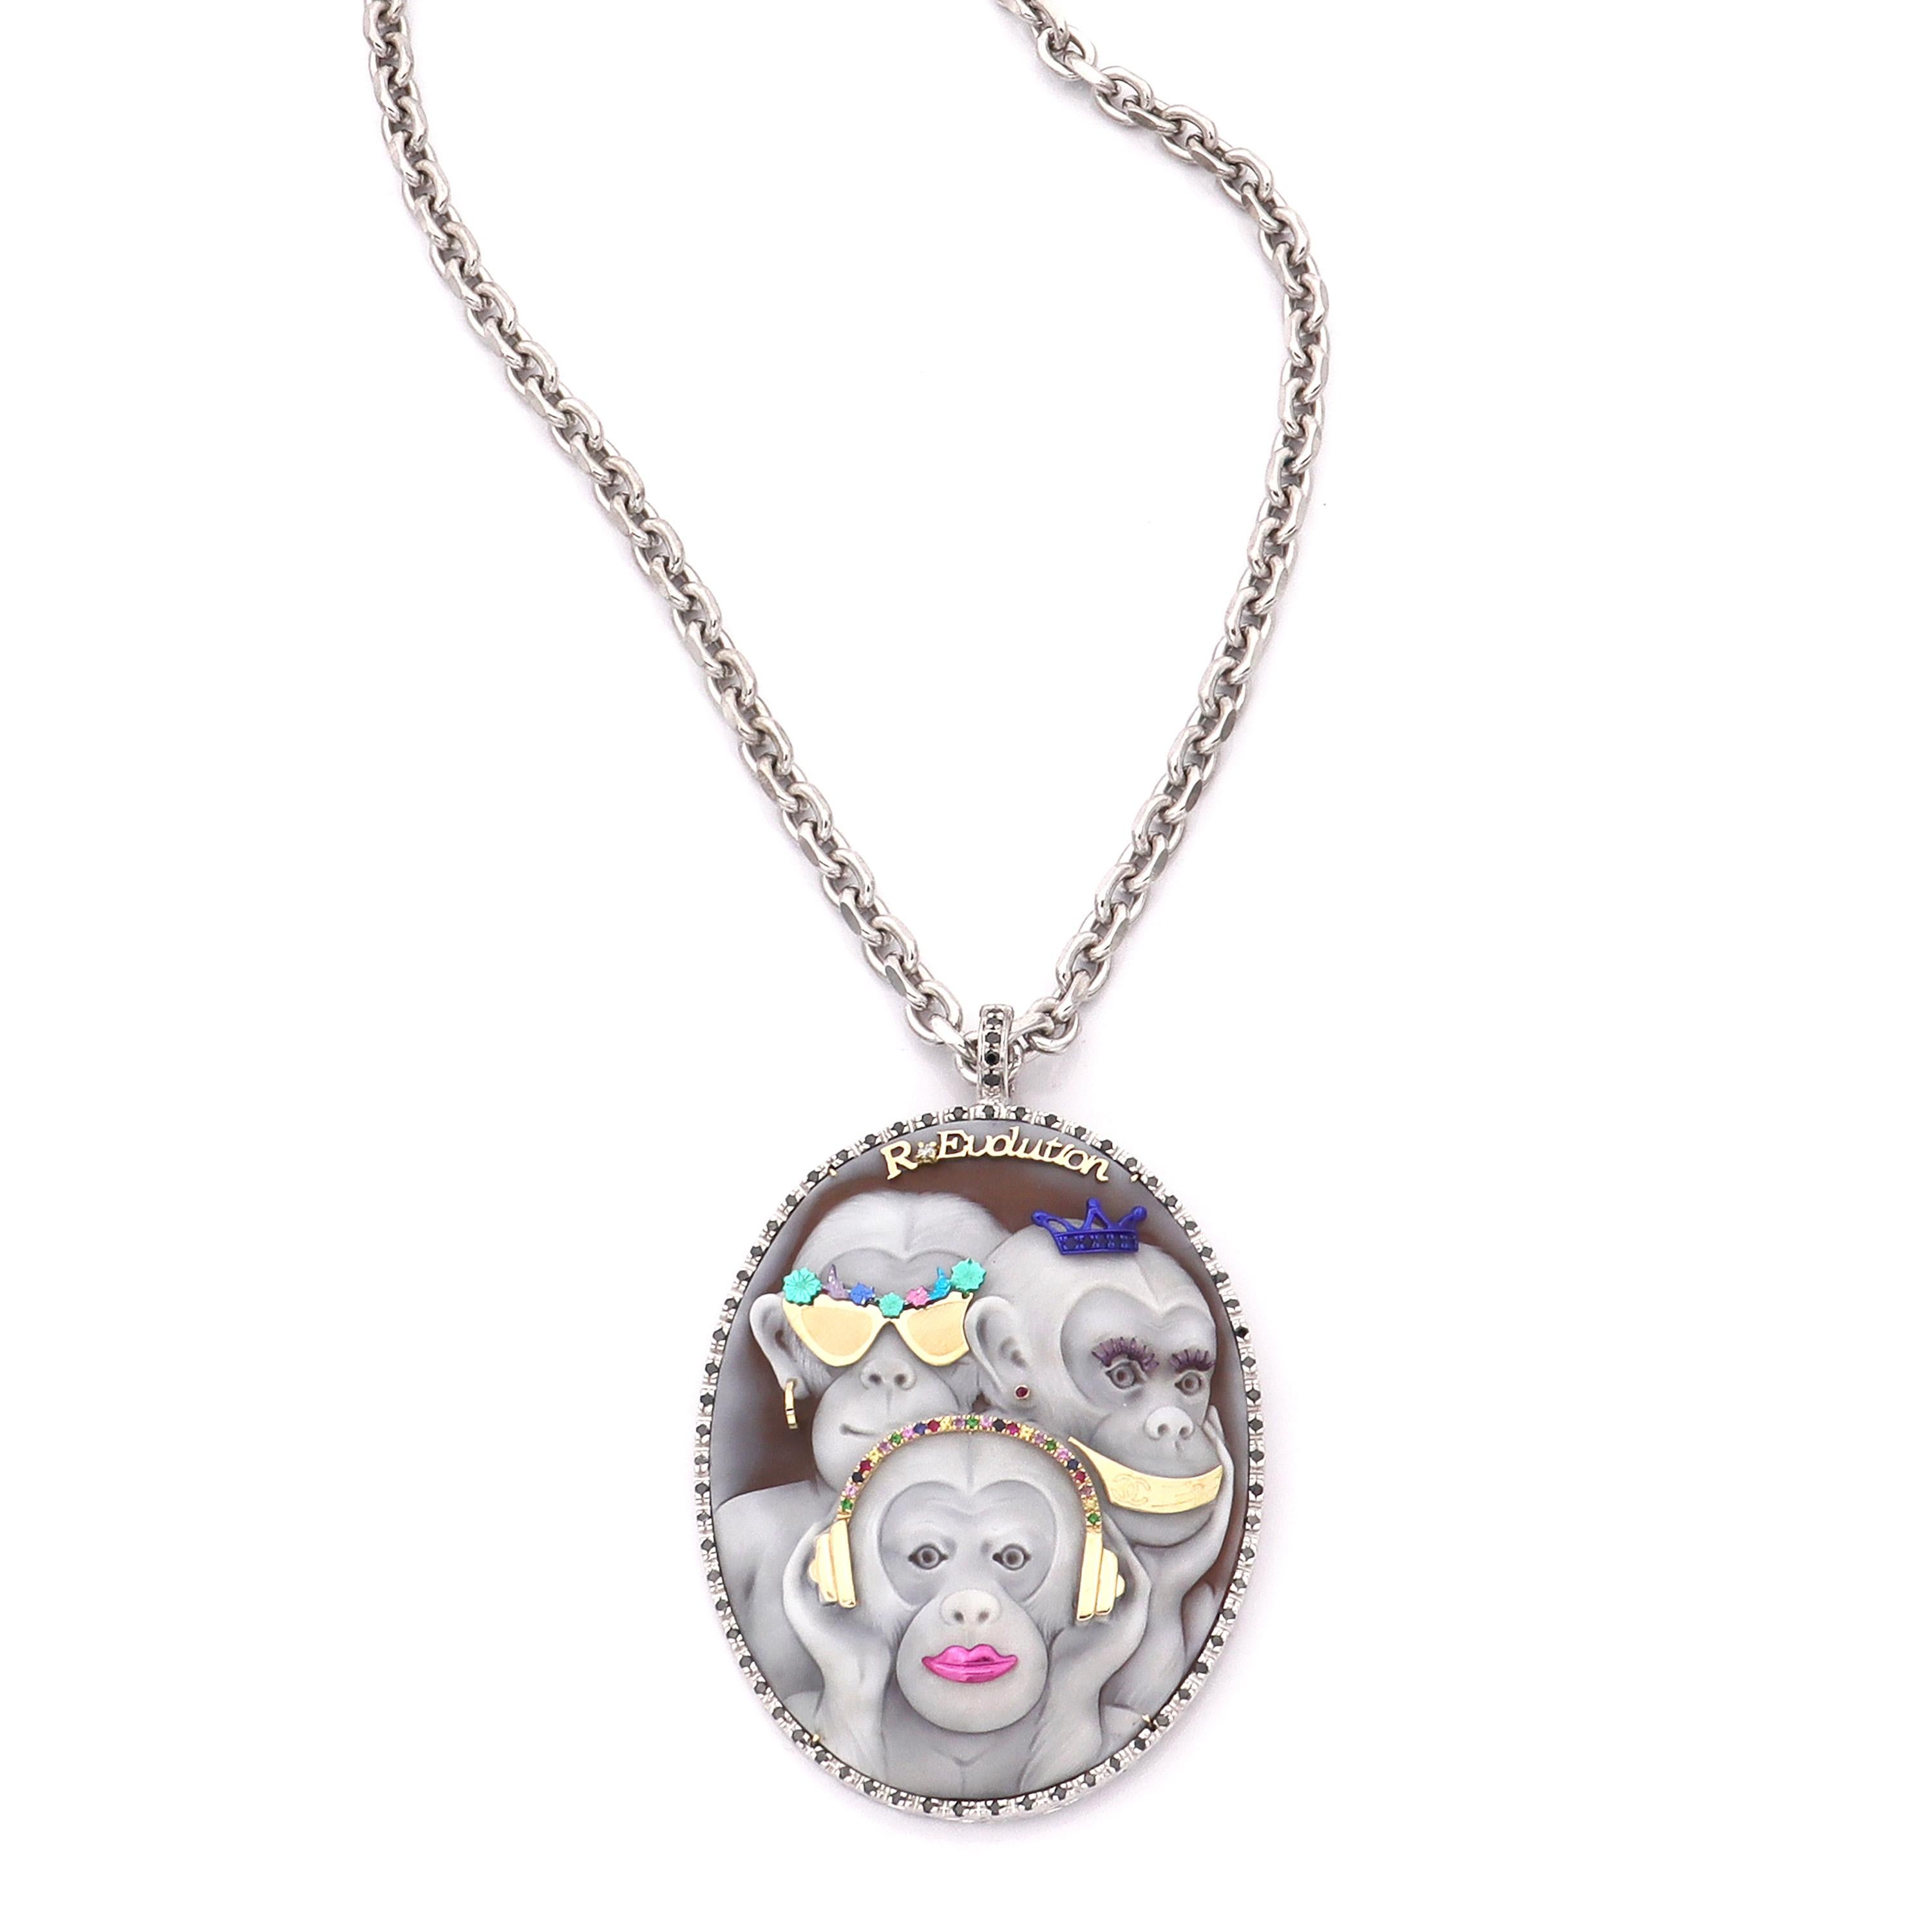 78mm sardonyx shell cameo, hand-carved set on 18kt gold and sterling silver with 1.05cts of black diamonds, 0.030cts of white diamonds, 0.38ct multistones (yellow sapphires, blue sapphires, pink sapphires, ruby, amethyst and tsavorites)

Chain: